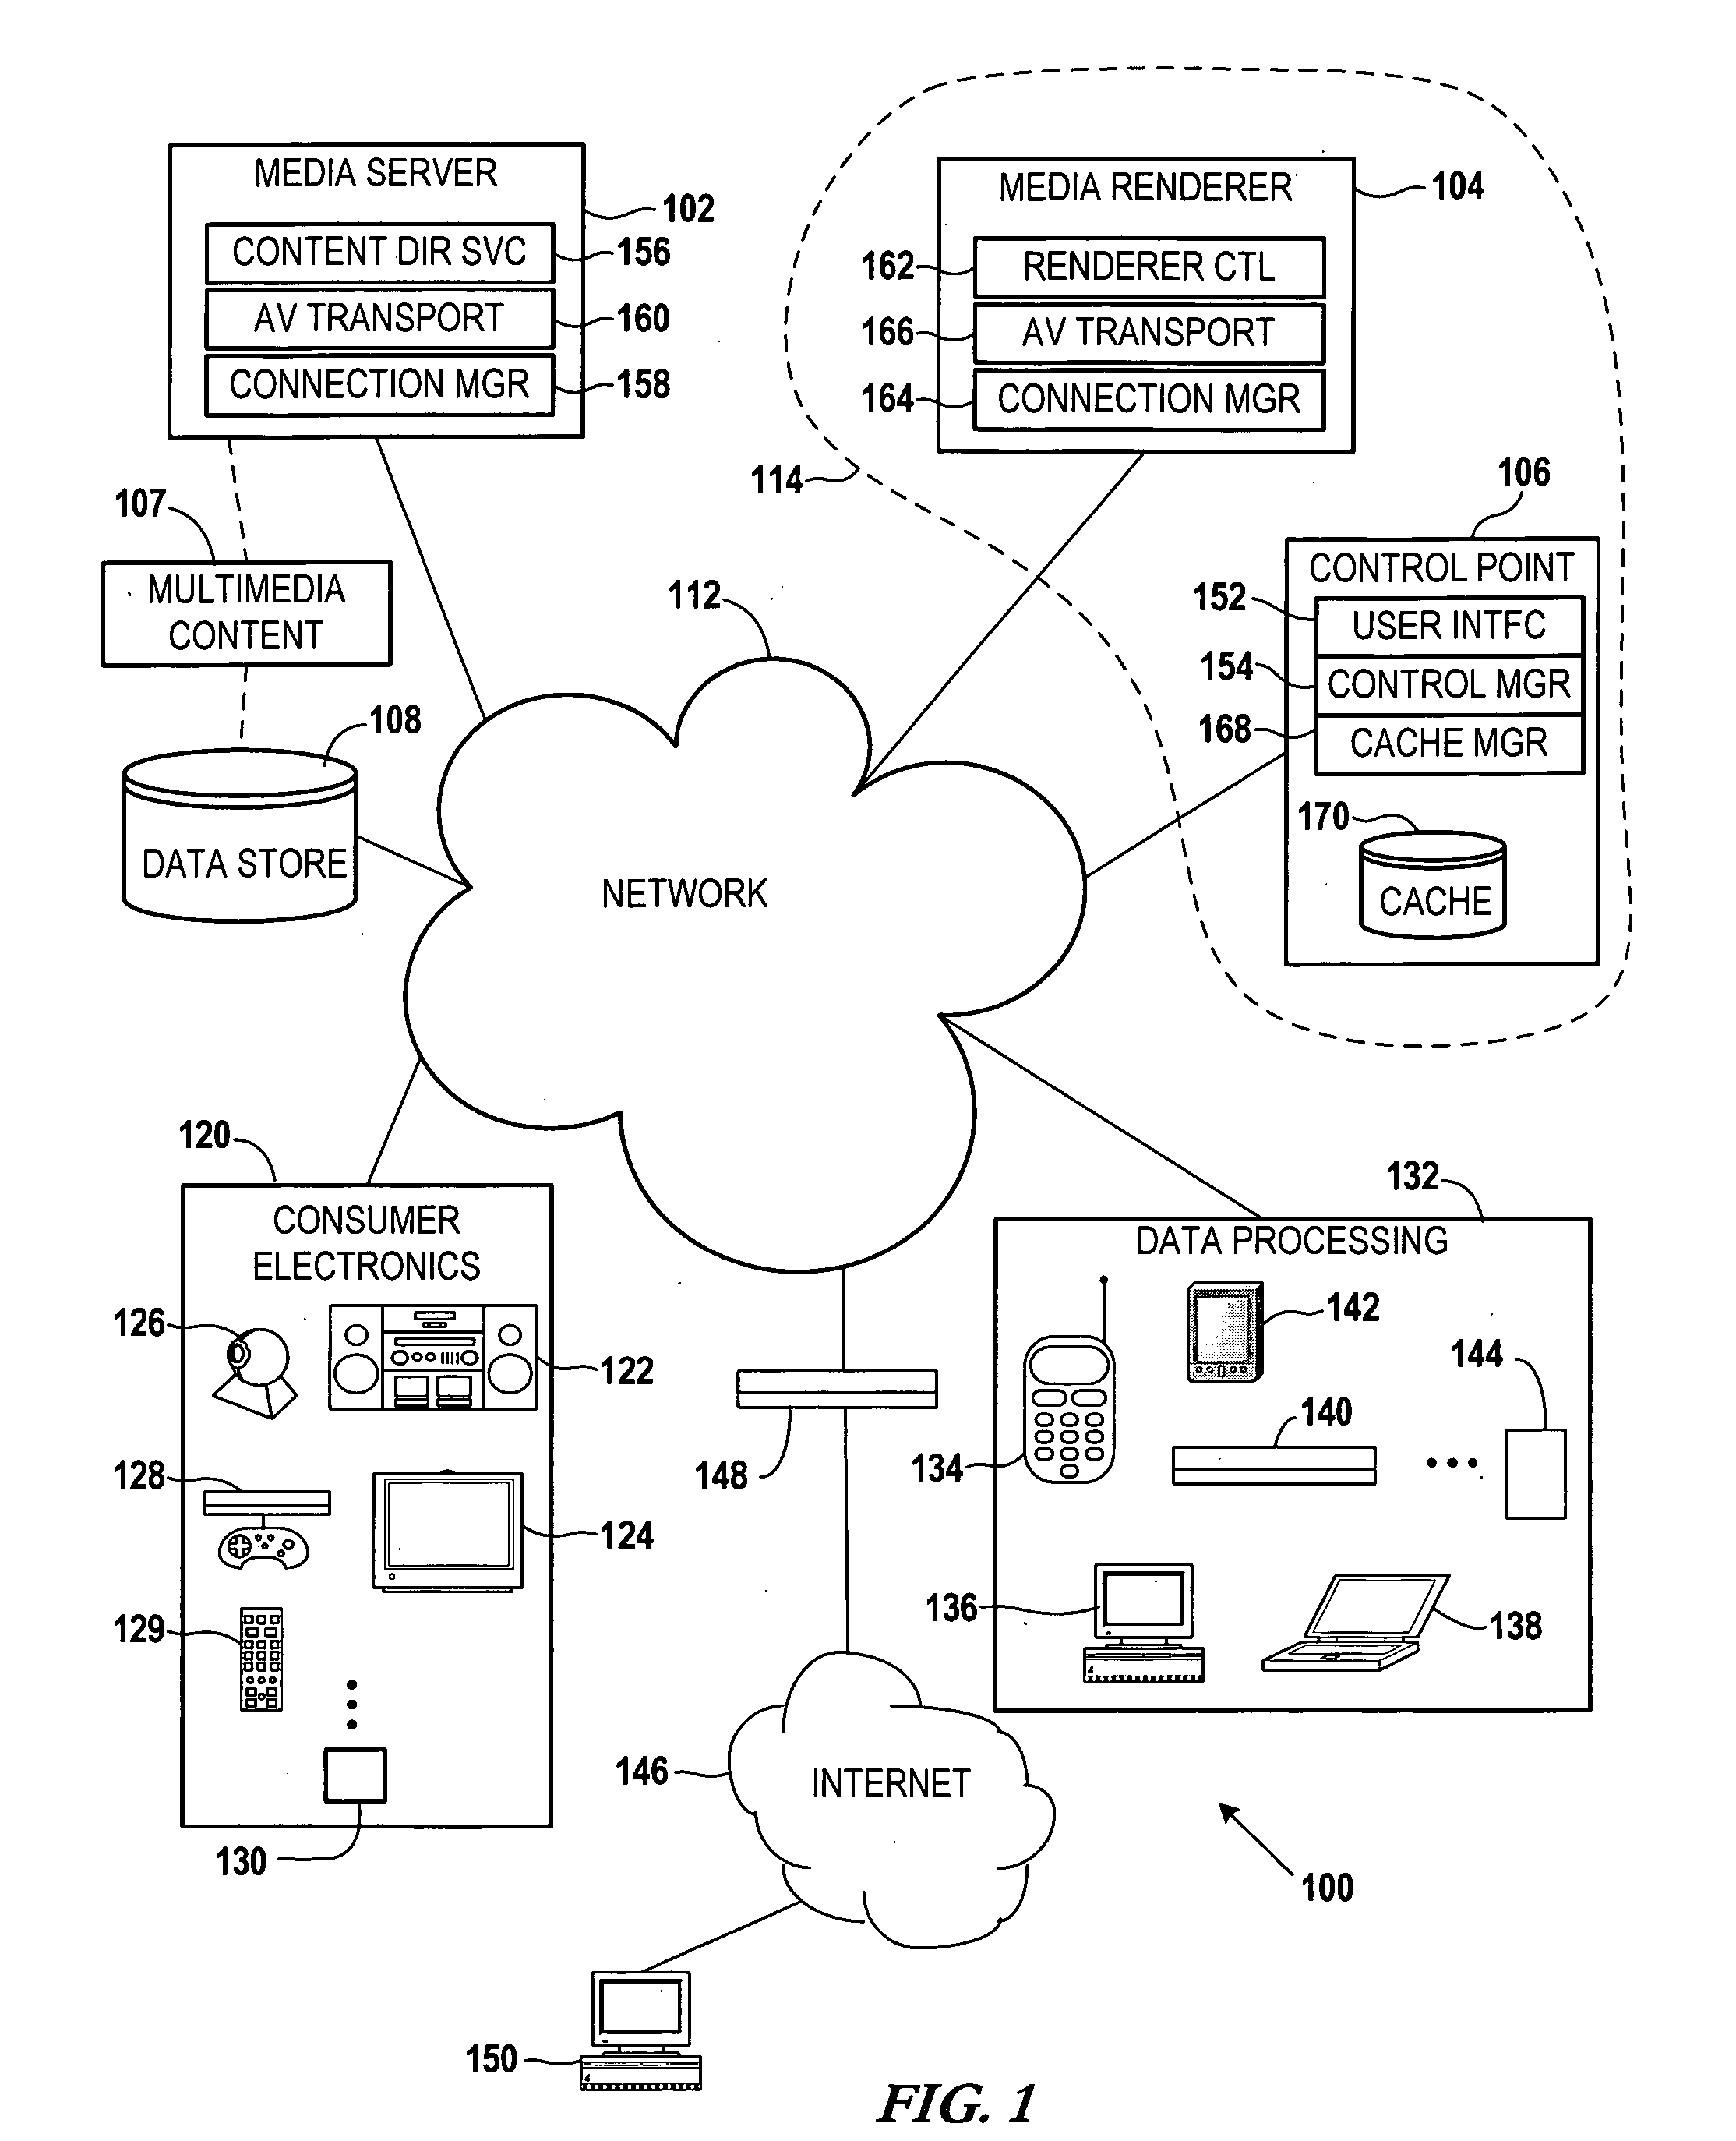 Caching directory server data for controlling the disposition of multimedia data on a network